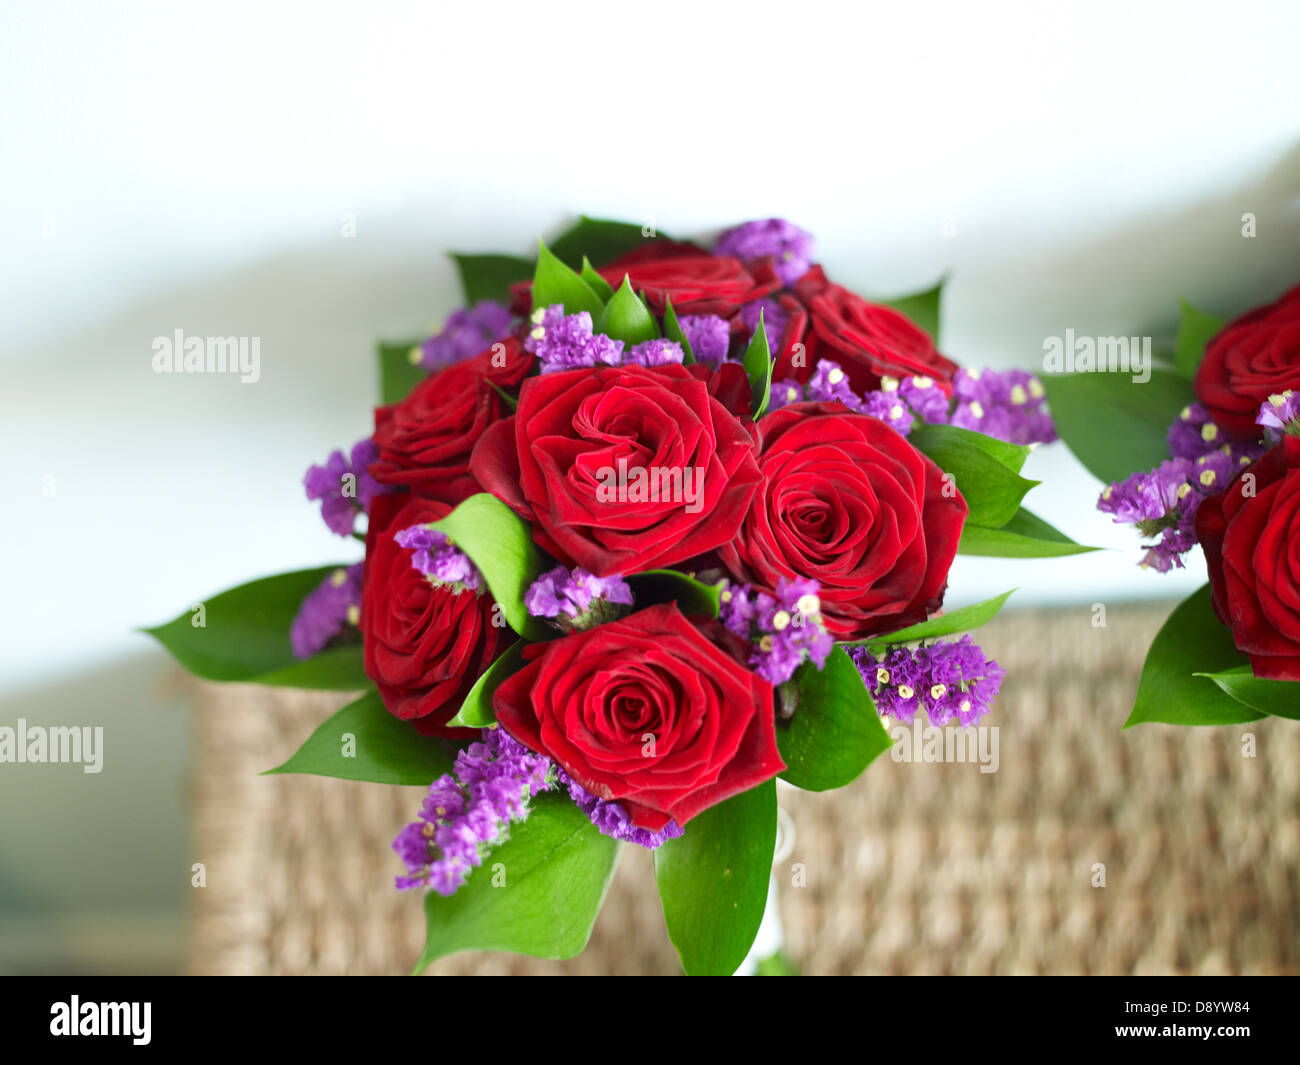 A bouquet of roses for a wedding, taken from above. Stock Photo